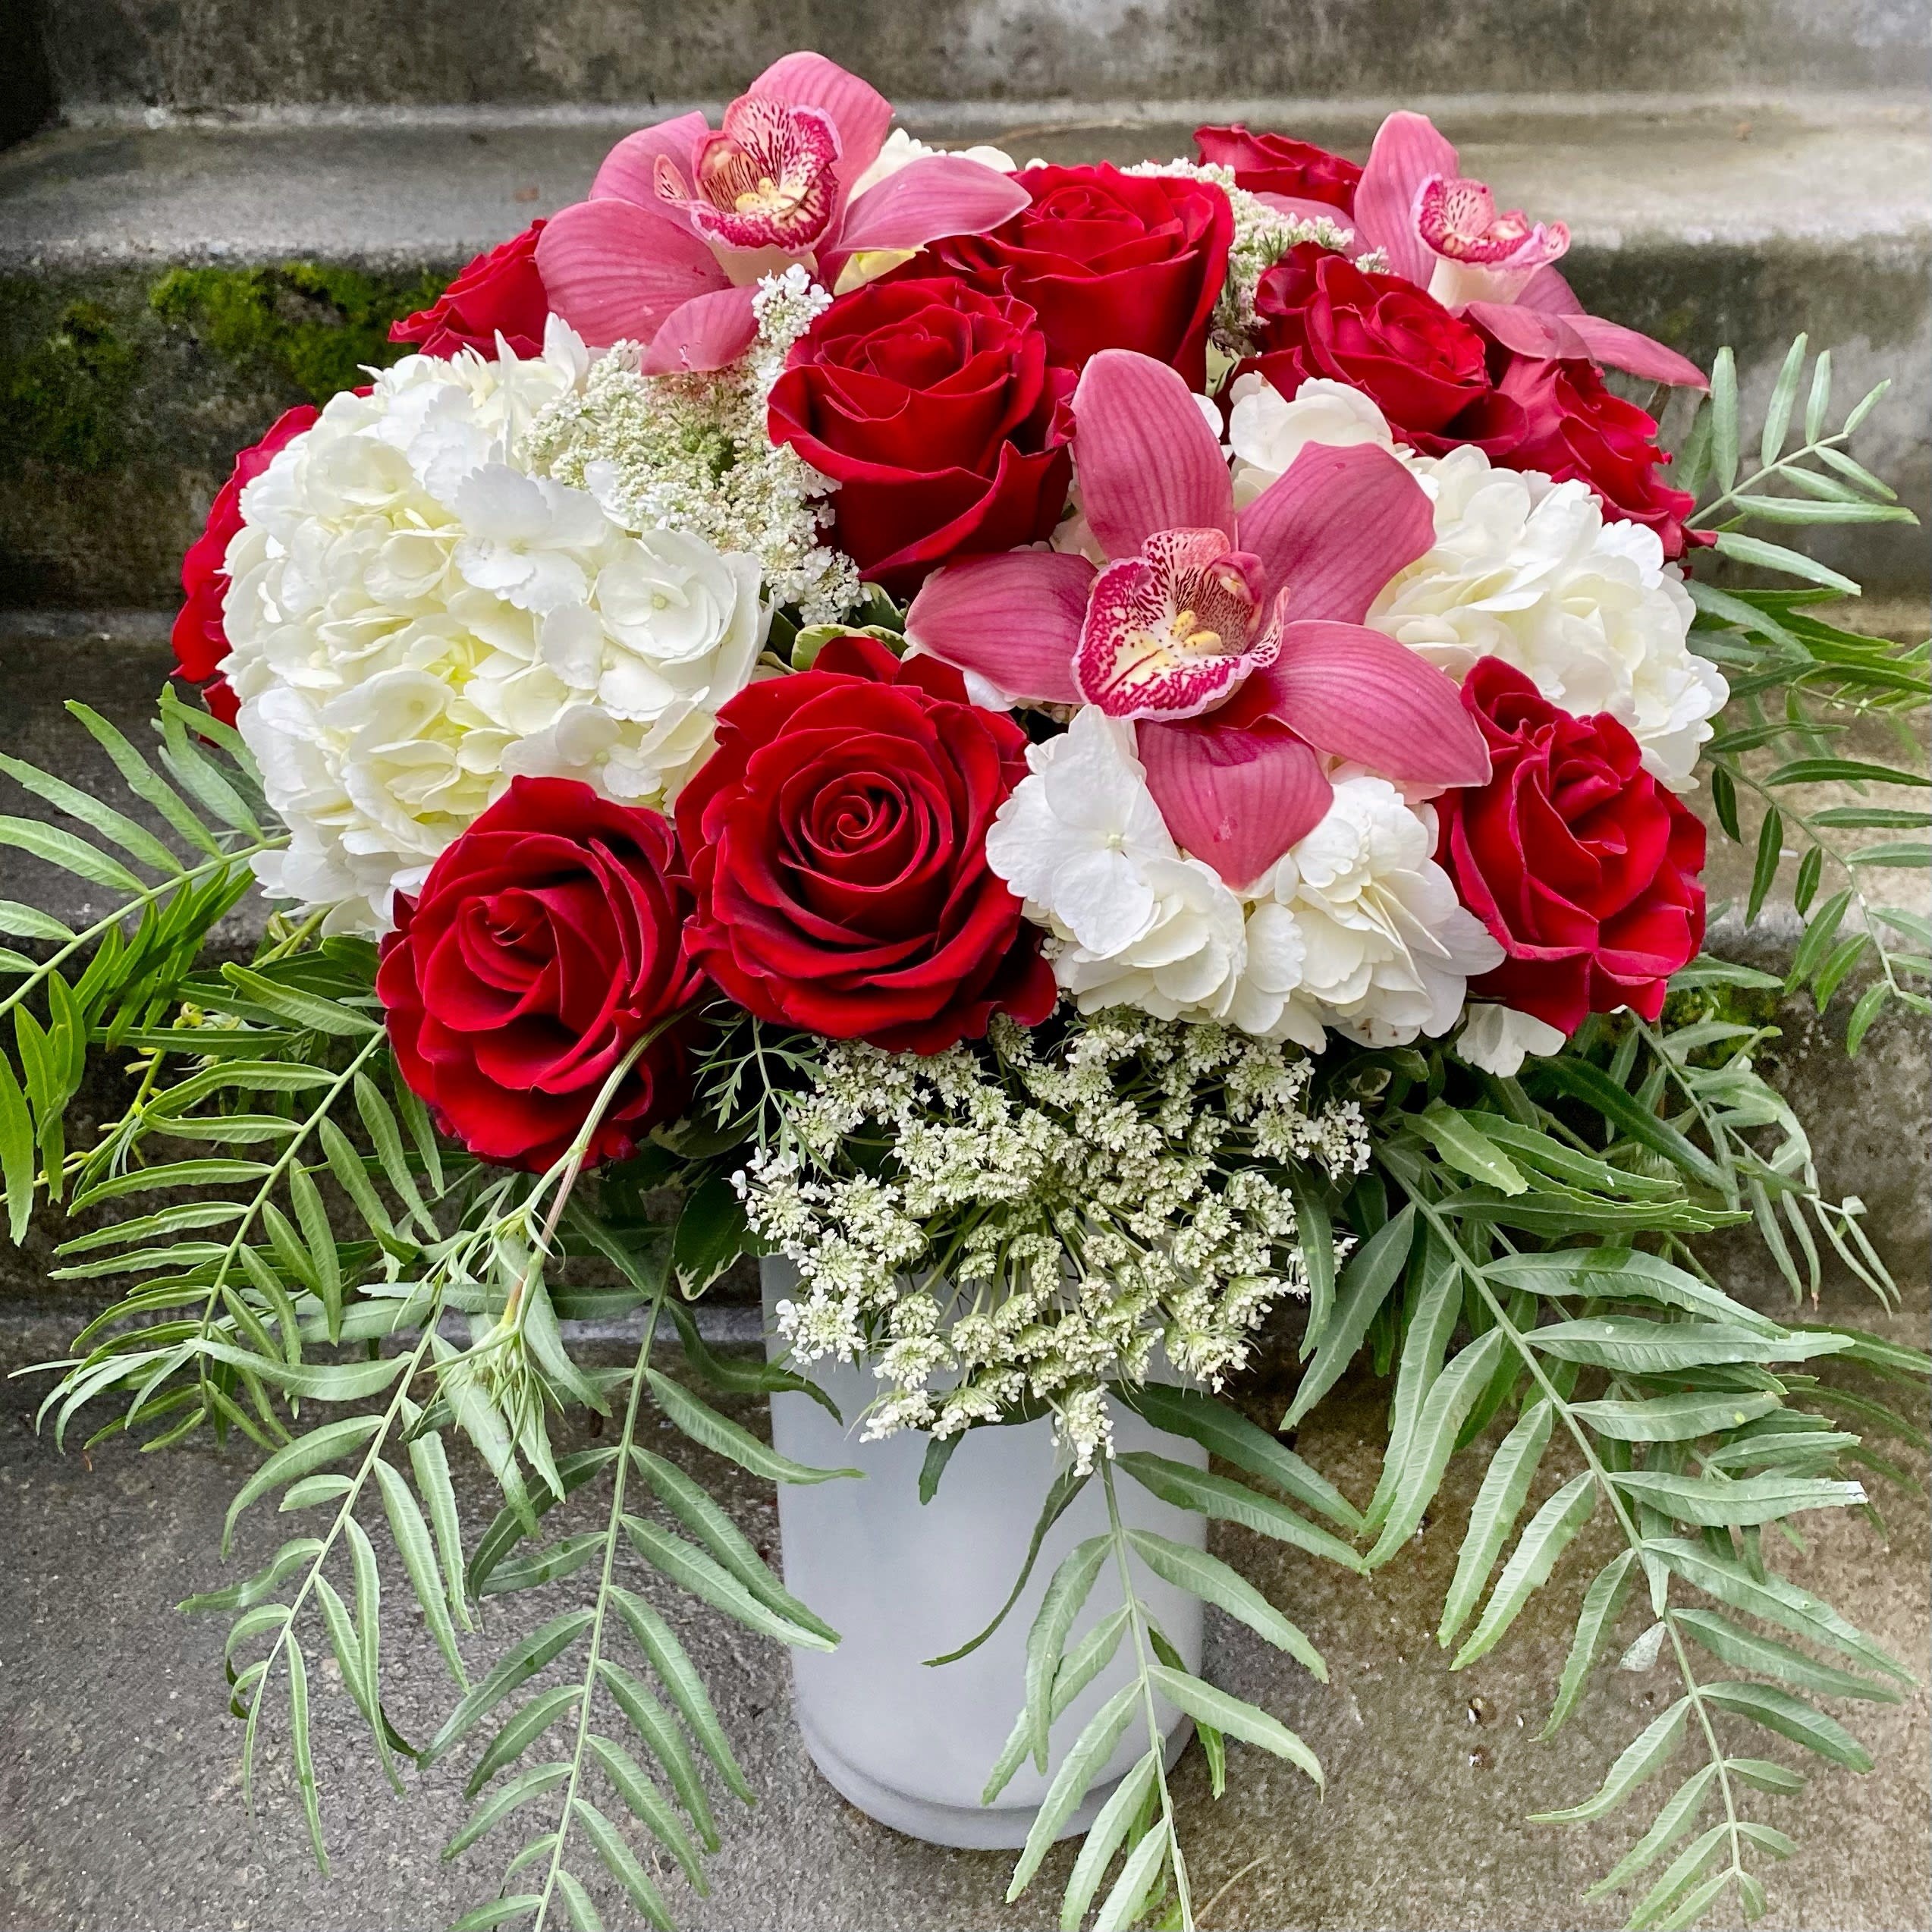 One Dozen Signature Red Roses - Our Signature Rose Arrangements are the epitome of our design style. Rather than focusing on stem length and filler, our signature roses have one-dozen perfect red roses tucked into pillows of fluffy hydrangeas accented with seasonal flowers and foliage. Cymbidium orchids serve as the perfect finishing touch, giving all our signature rose arrangements that special Fiori flair! The result: an arrangement that is beautiful, lush and just a little bit decadent.  The vase is a 10-inch glass cylinder, whose clean lines complement the arrangement while allowing the focus to stay on the flowers. The vase is available in white or in a clear glass lined with synthetic variegated ti leaves that make the roses really pop! We also offer our Signature Roses in a versatile low cylinder vase. If you prefer the lower style, let us know by leaving a note in the “Special Instructions” section during checkout.  The Deluxe version includes even more accent flowers and orchids, while the Premium option upgrades the arrangement to eighteen red roses in a 12-inch vase.  Approximate dimensions - Standard and Deluxe: 14 inches wide and 17 inches tall. Premium: 15 inches wide and 20 inches tall.  Orders of this Fiori Floral Design original arrangement for delivery to an address outside of our standard delivery area will likely require substitutions of the vase, accents or greenery by the local florist who fills your order. You can check whether a recipient’s address is in our standard delivery area before you order by looking at the list of Neighborhoods, Cities and Zip Codes at the bottom of our home page or by giving us a call at (206) 329-3944.